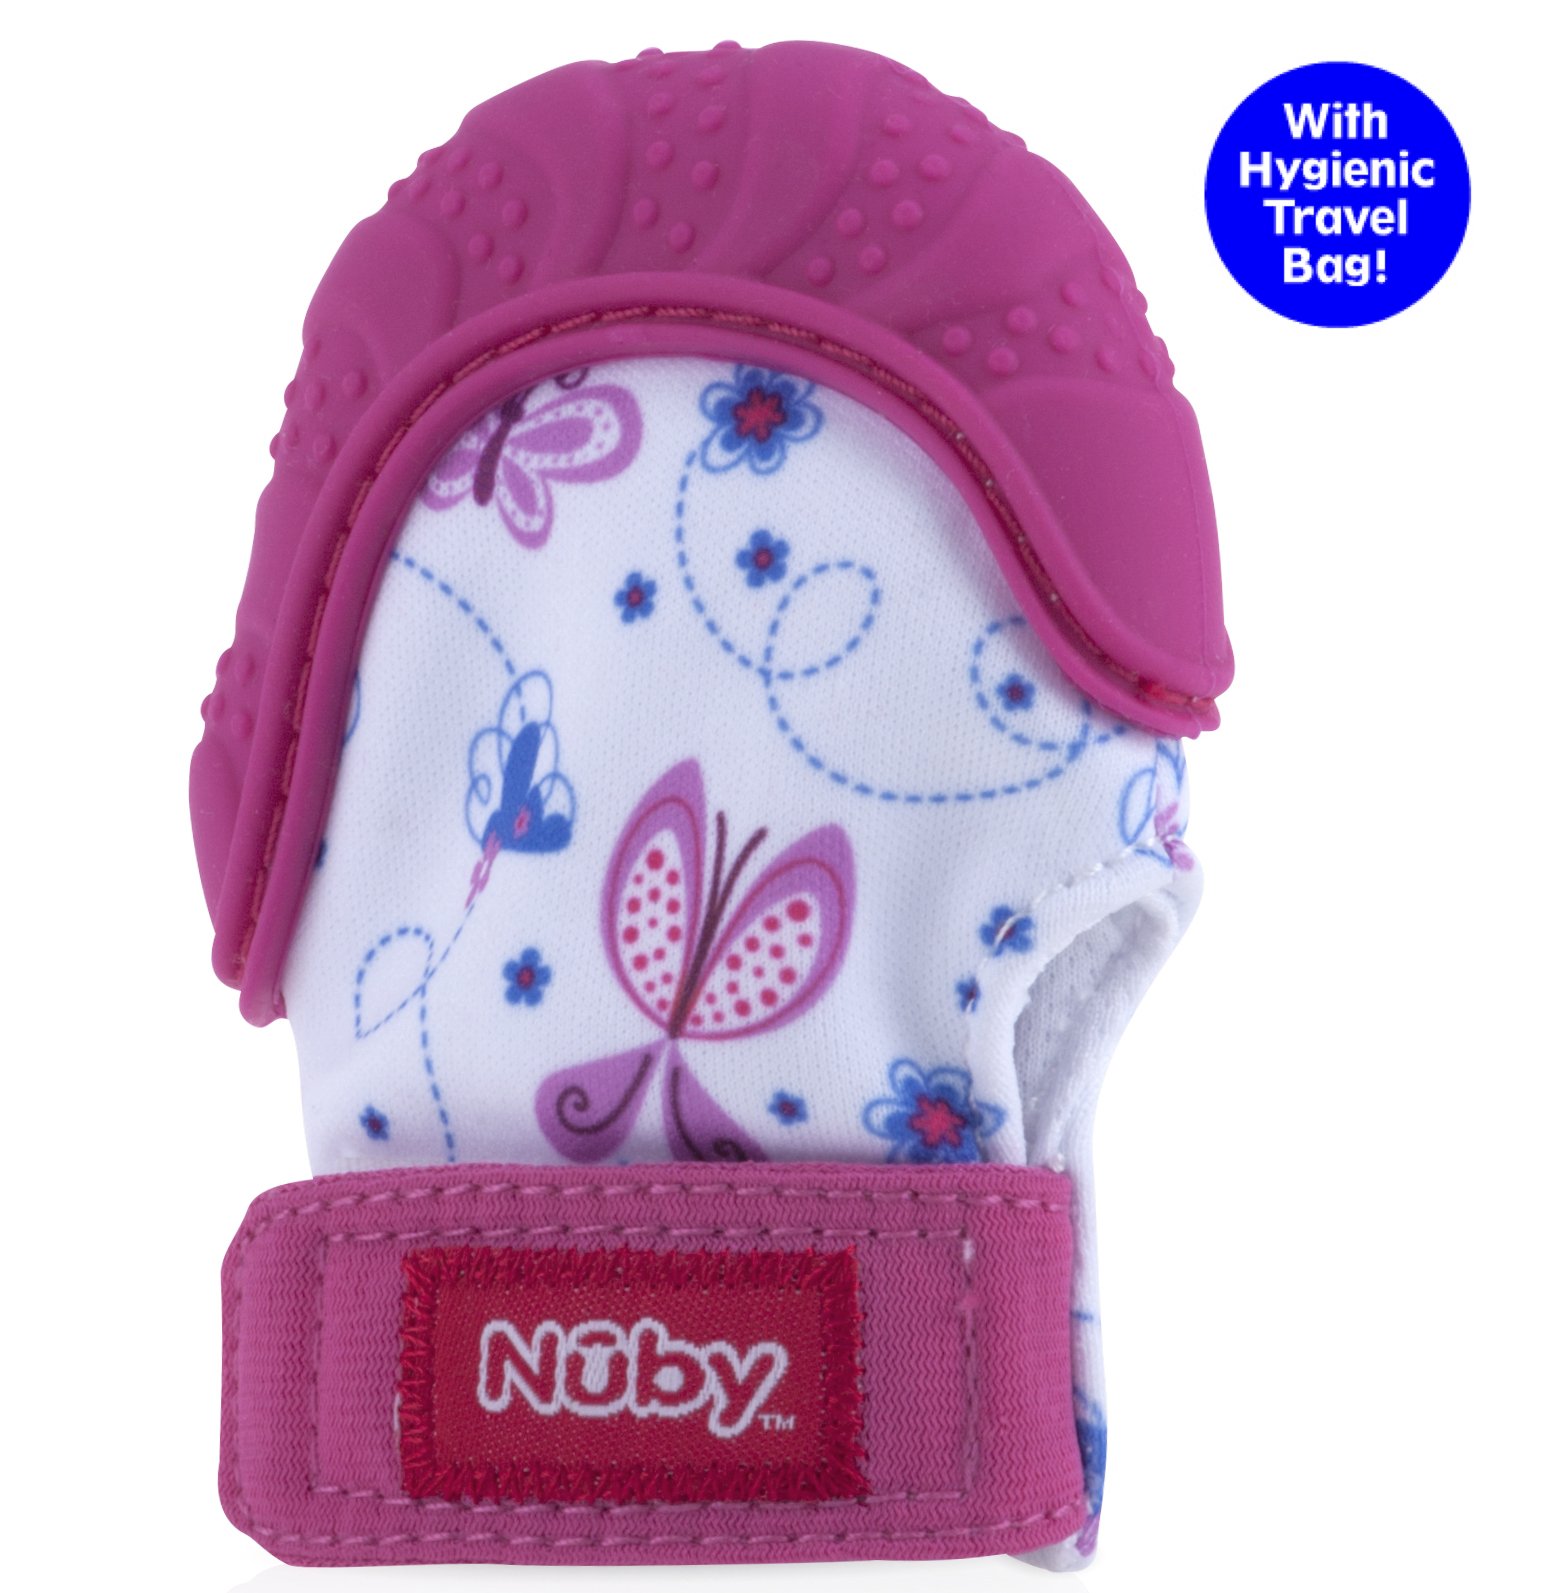 Nuby Soothing Teething Mitten with Hygienic Travel Bag, Pink.